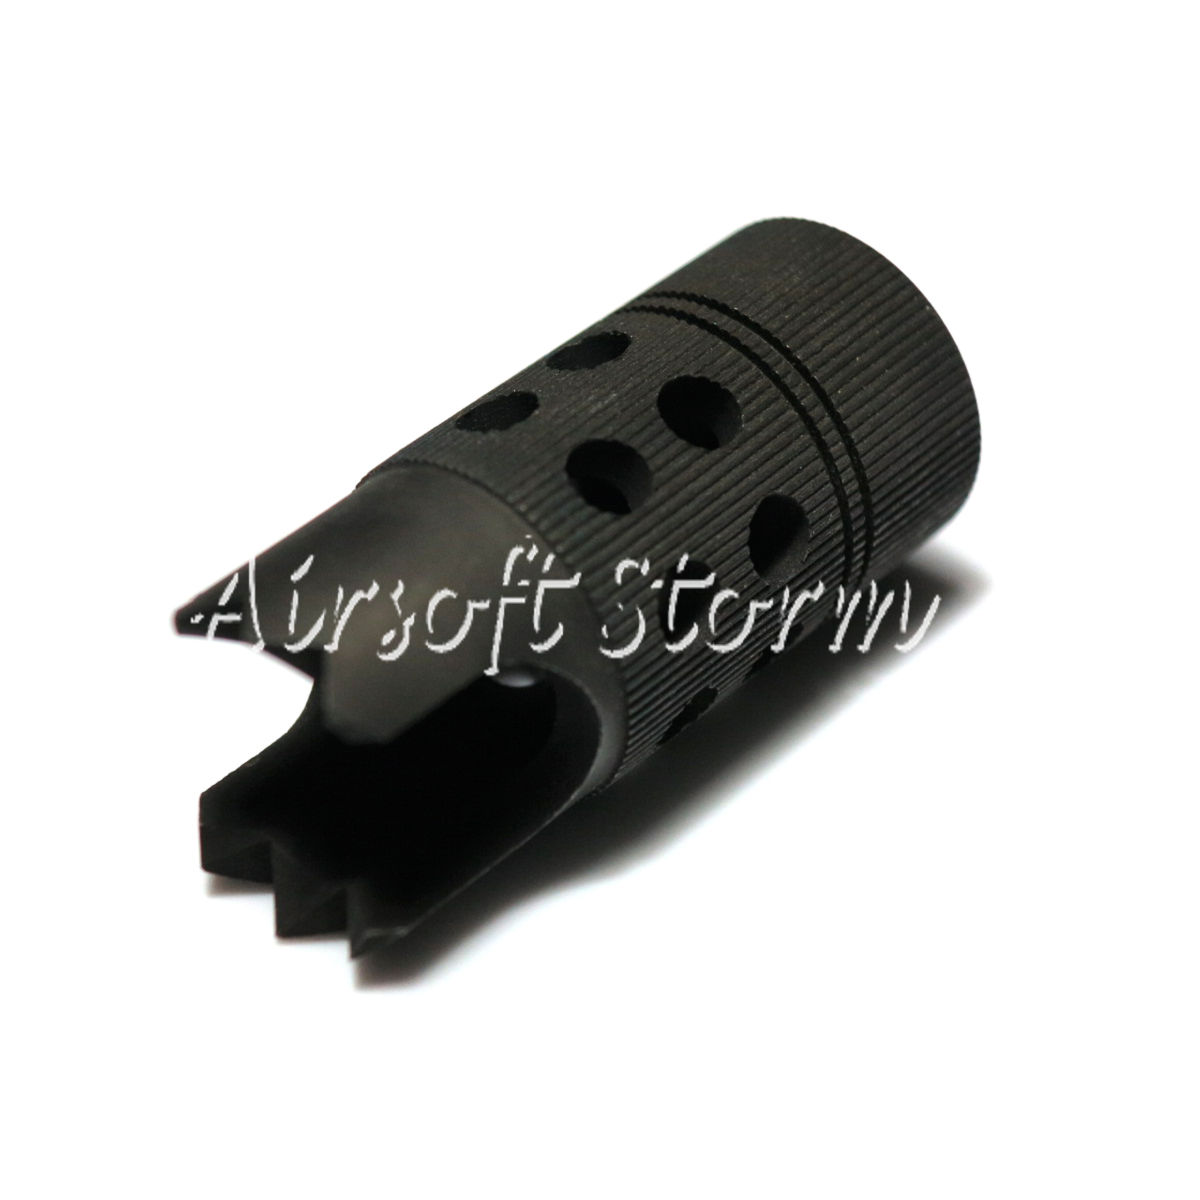 Shooting Gear Army Force Rebar Cutter Steel Flash Hider 14mm CCW Black - Click Image to Close